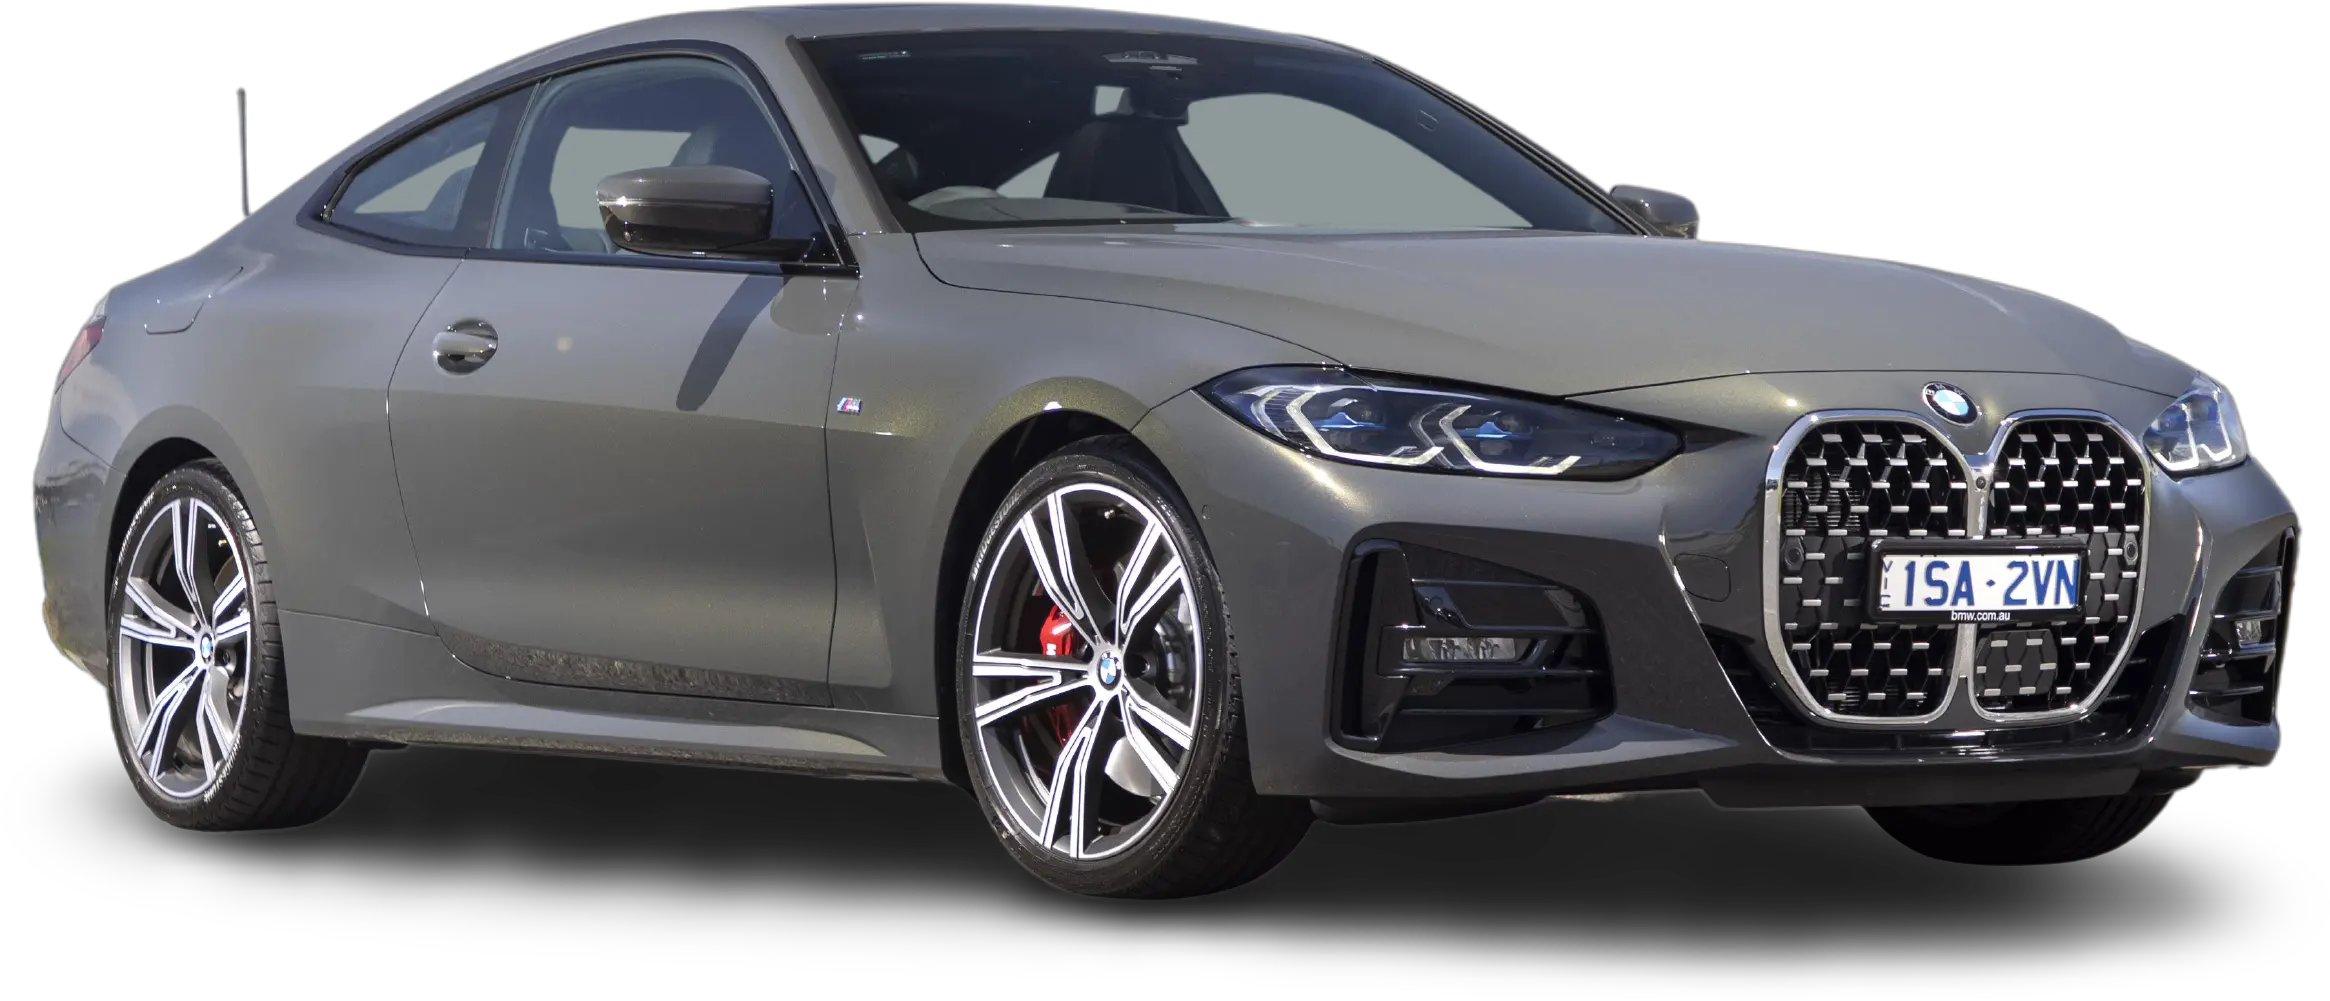 Bmw 4 Series Review Price And Specification Carexpert Carbon Fibers Png Bmw Car Icon